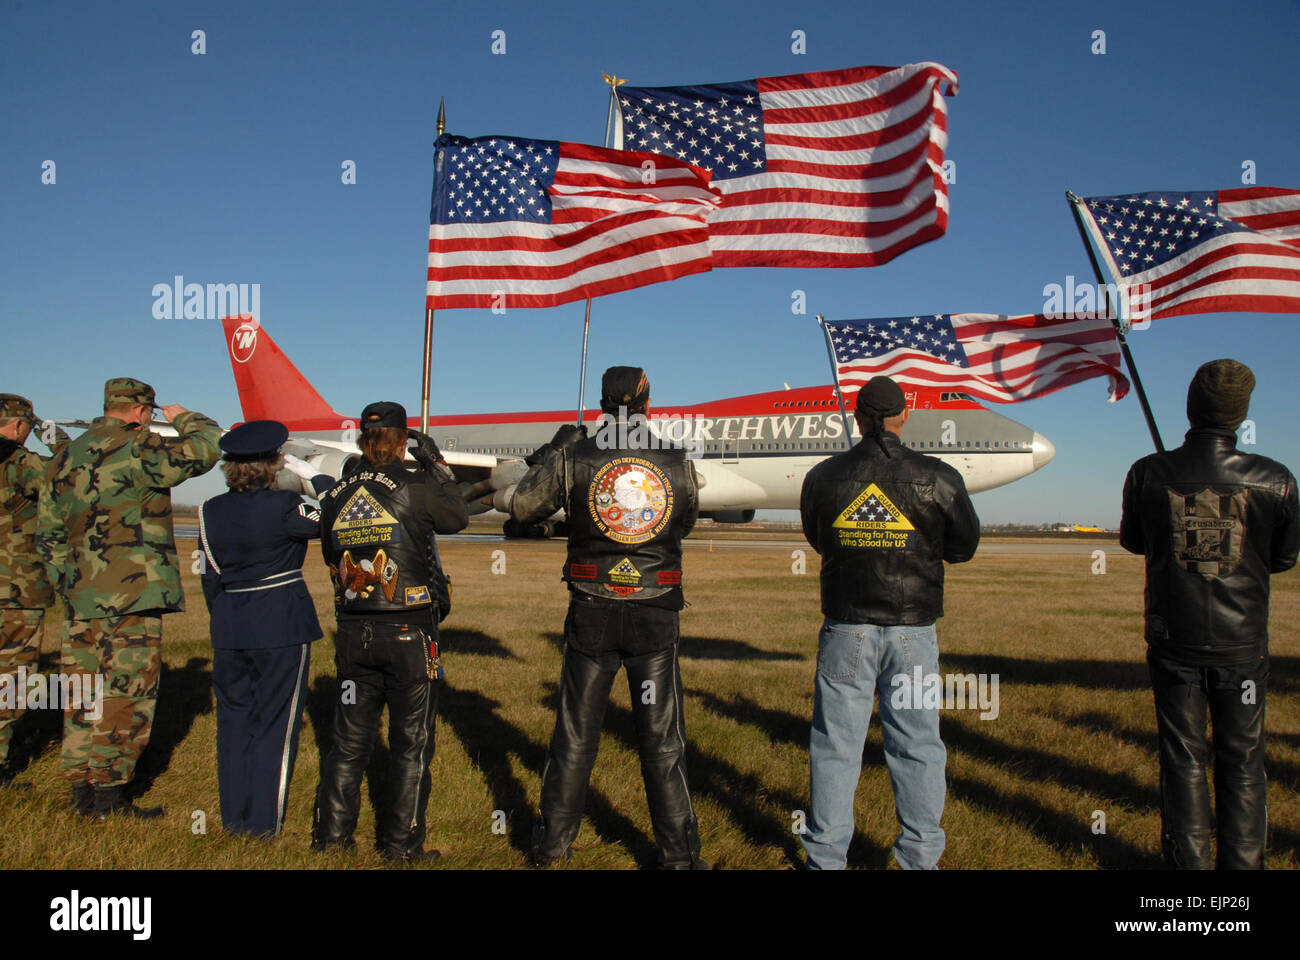 From left, North Dakota Air National Guardsmen, Patriot Guard motorcycle riders and North Dakota Army National Guardsmen salute and stand at attention as a plane carrying retired veterans to Washington, D.C., to tour the National World War II Memorial departs Hector International Airport in Fargo, N.D., Nov. 2, 2007. U.S. Air Force Senior Master Sgt. David H. Lipp Released Stock Photo